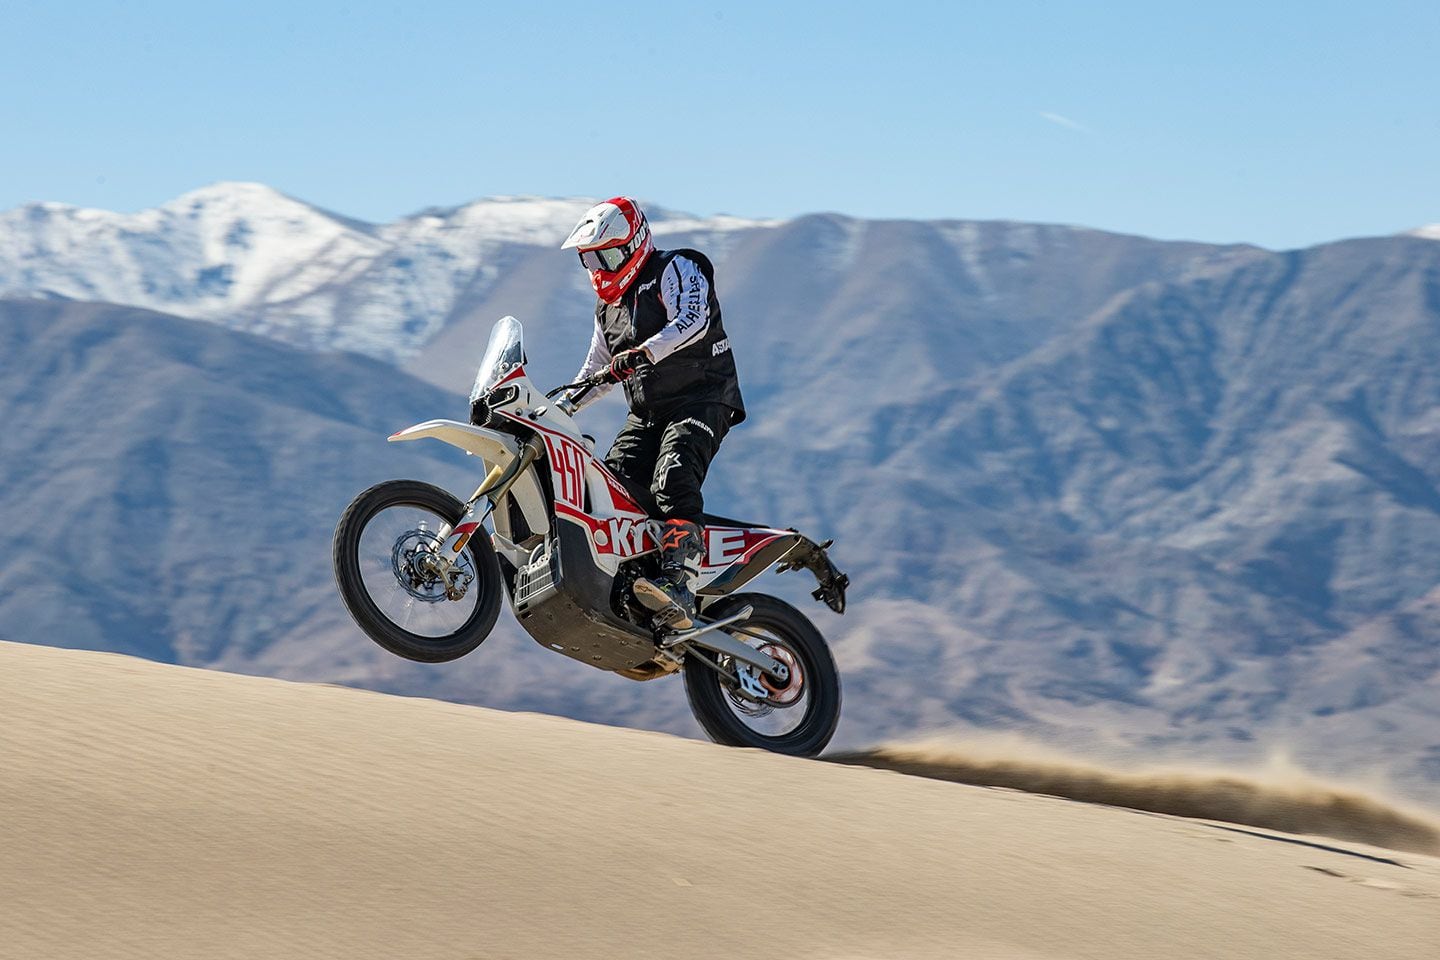 Last year we tested the Kove FSE 450R Rally and were impressed.